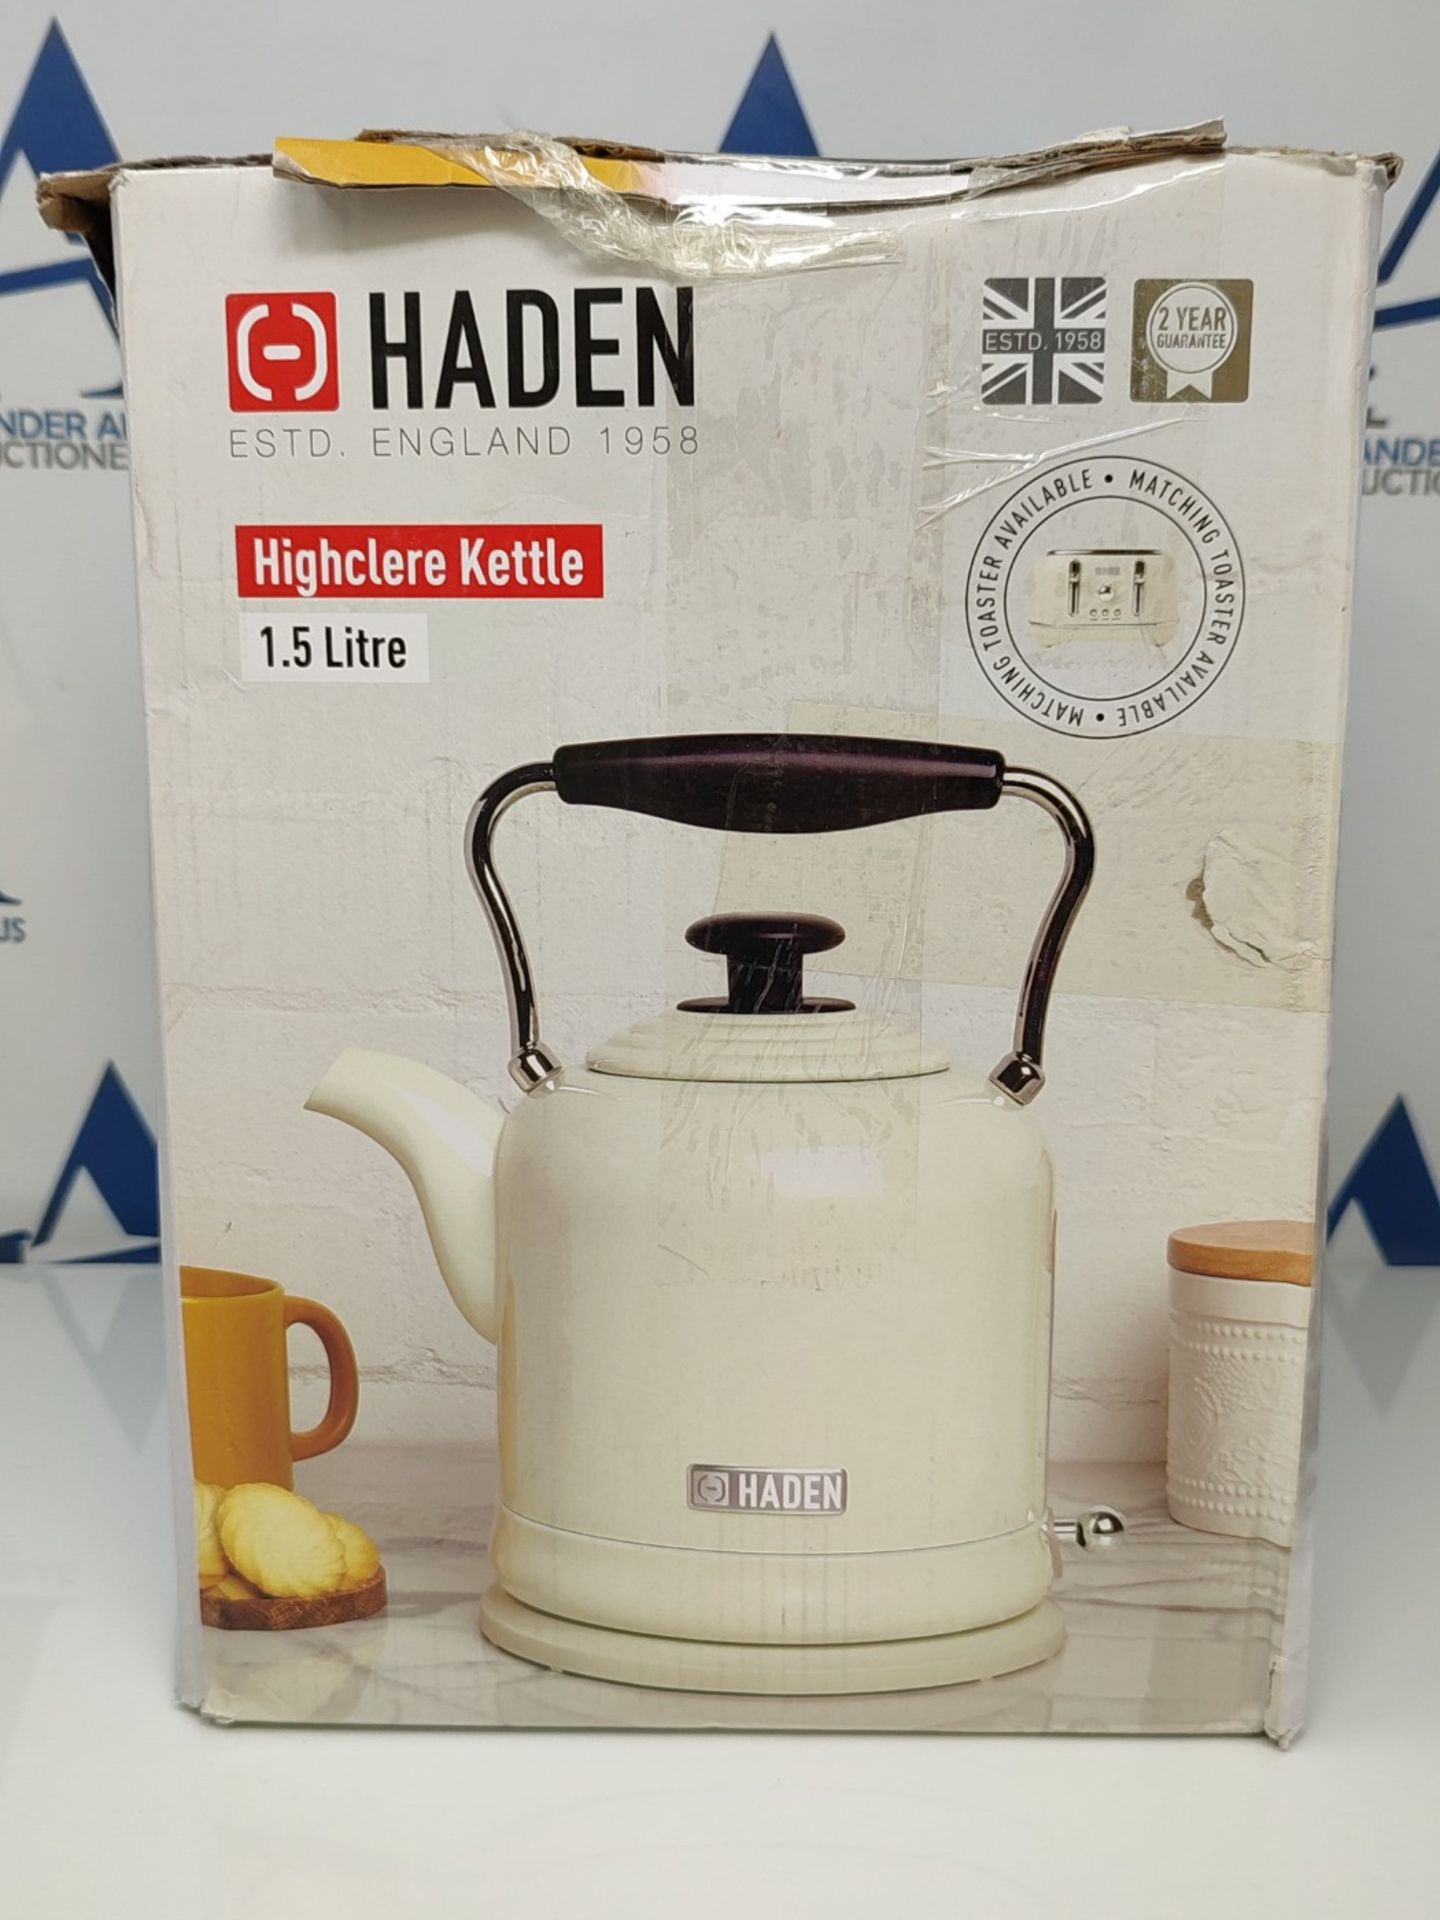 Haden Highclere Cream Kettle Cordless - Electric Fast Boil Kettle, 3000W, 1.5 Litre, S